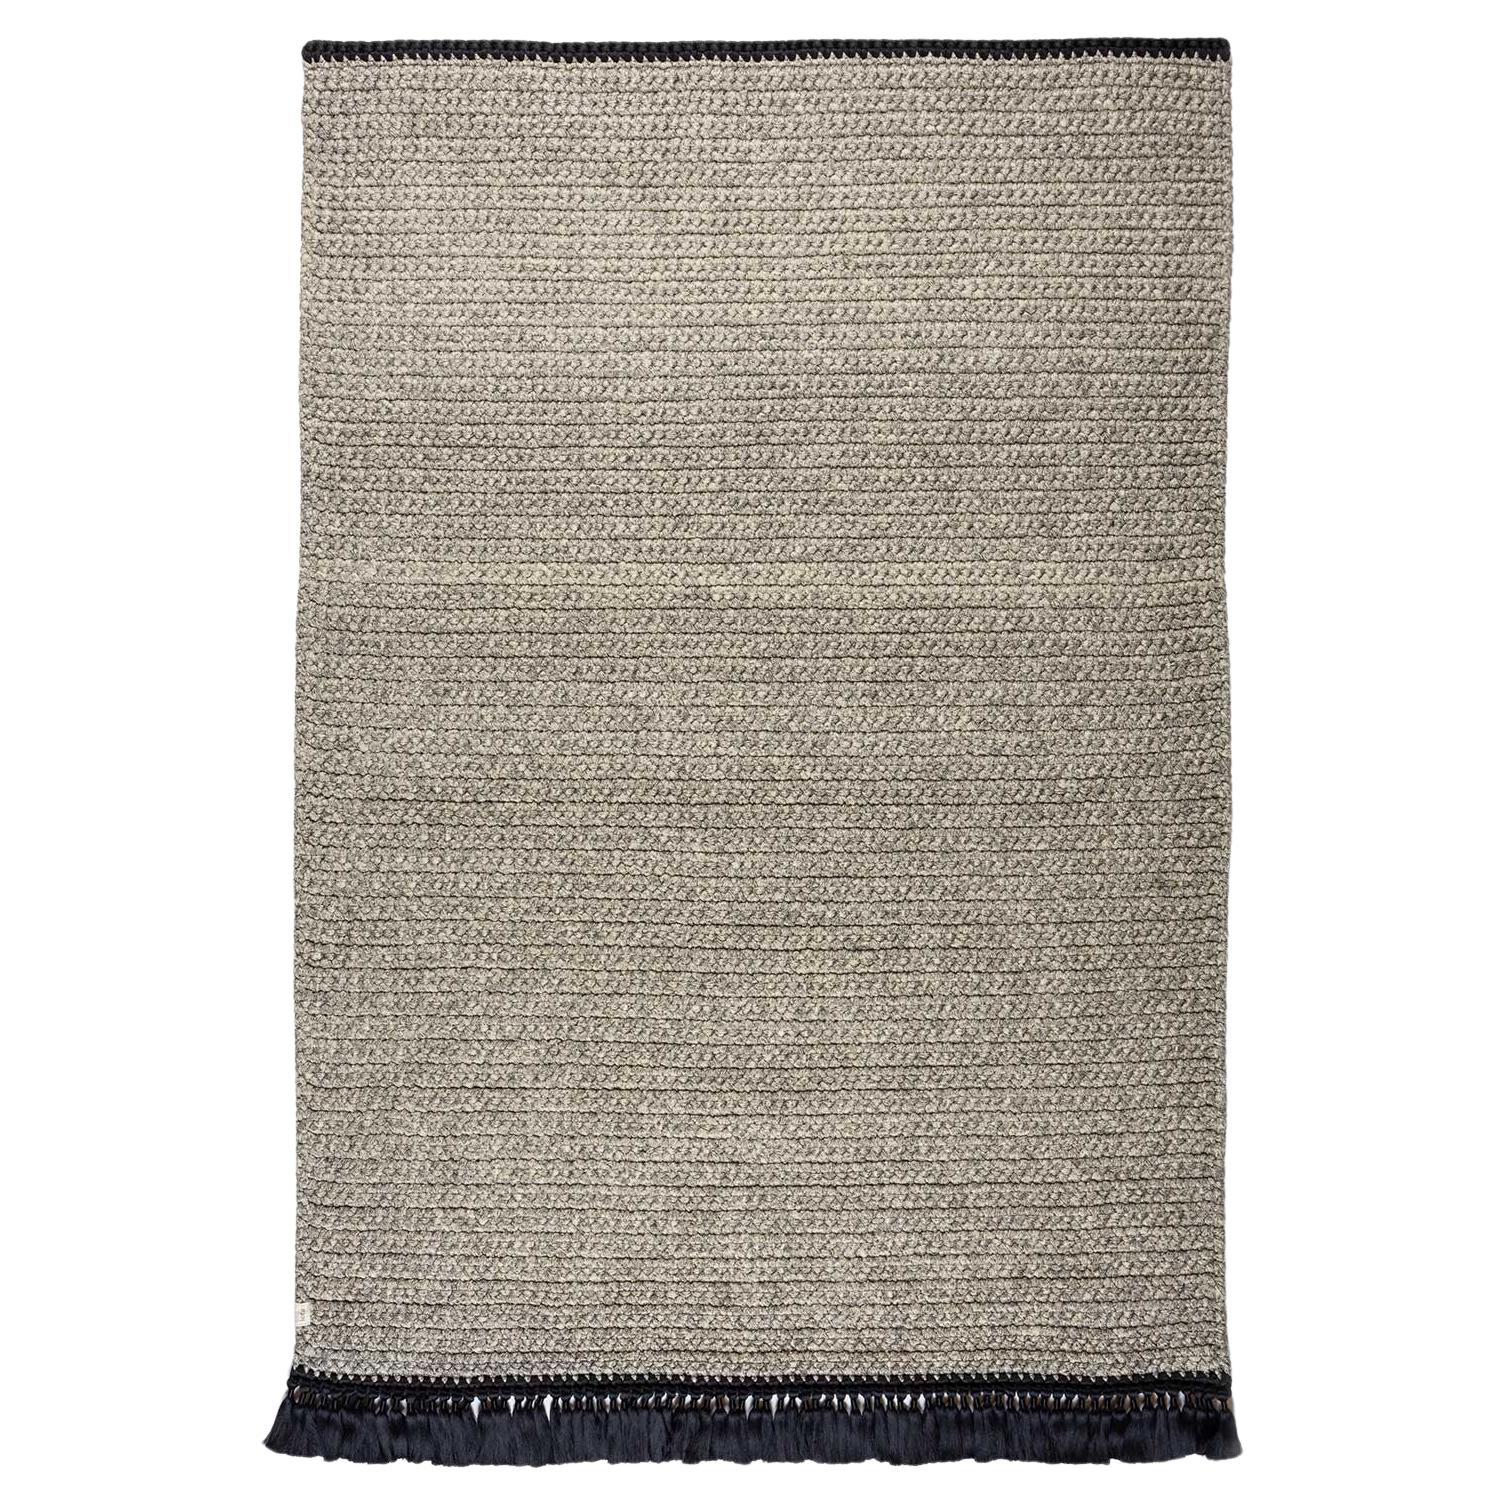 Handmade Crochet Thick Rug 170x240 cm in Grey Beige Black Colors For Sale